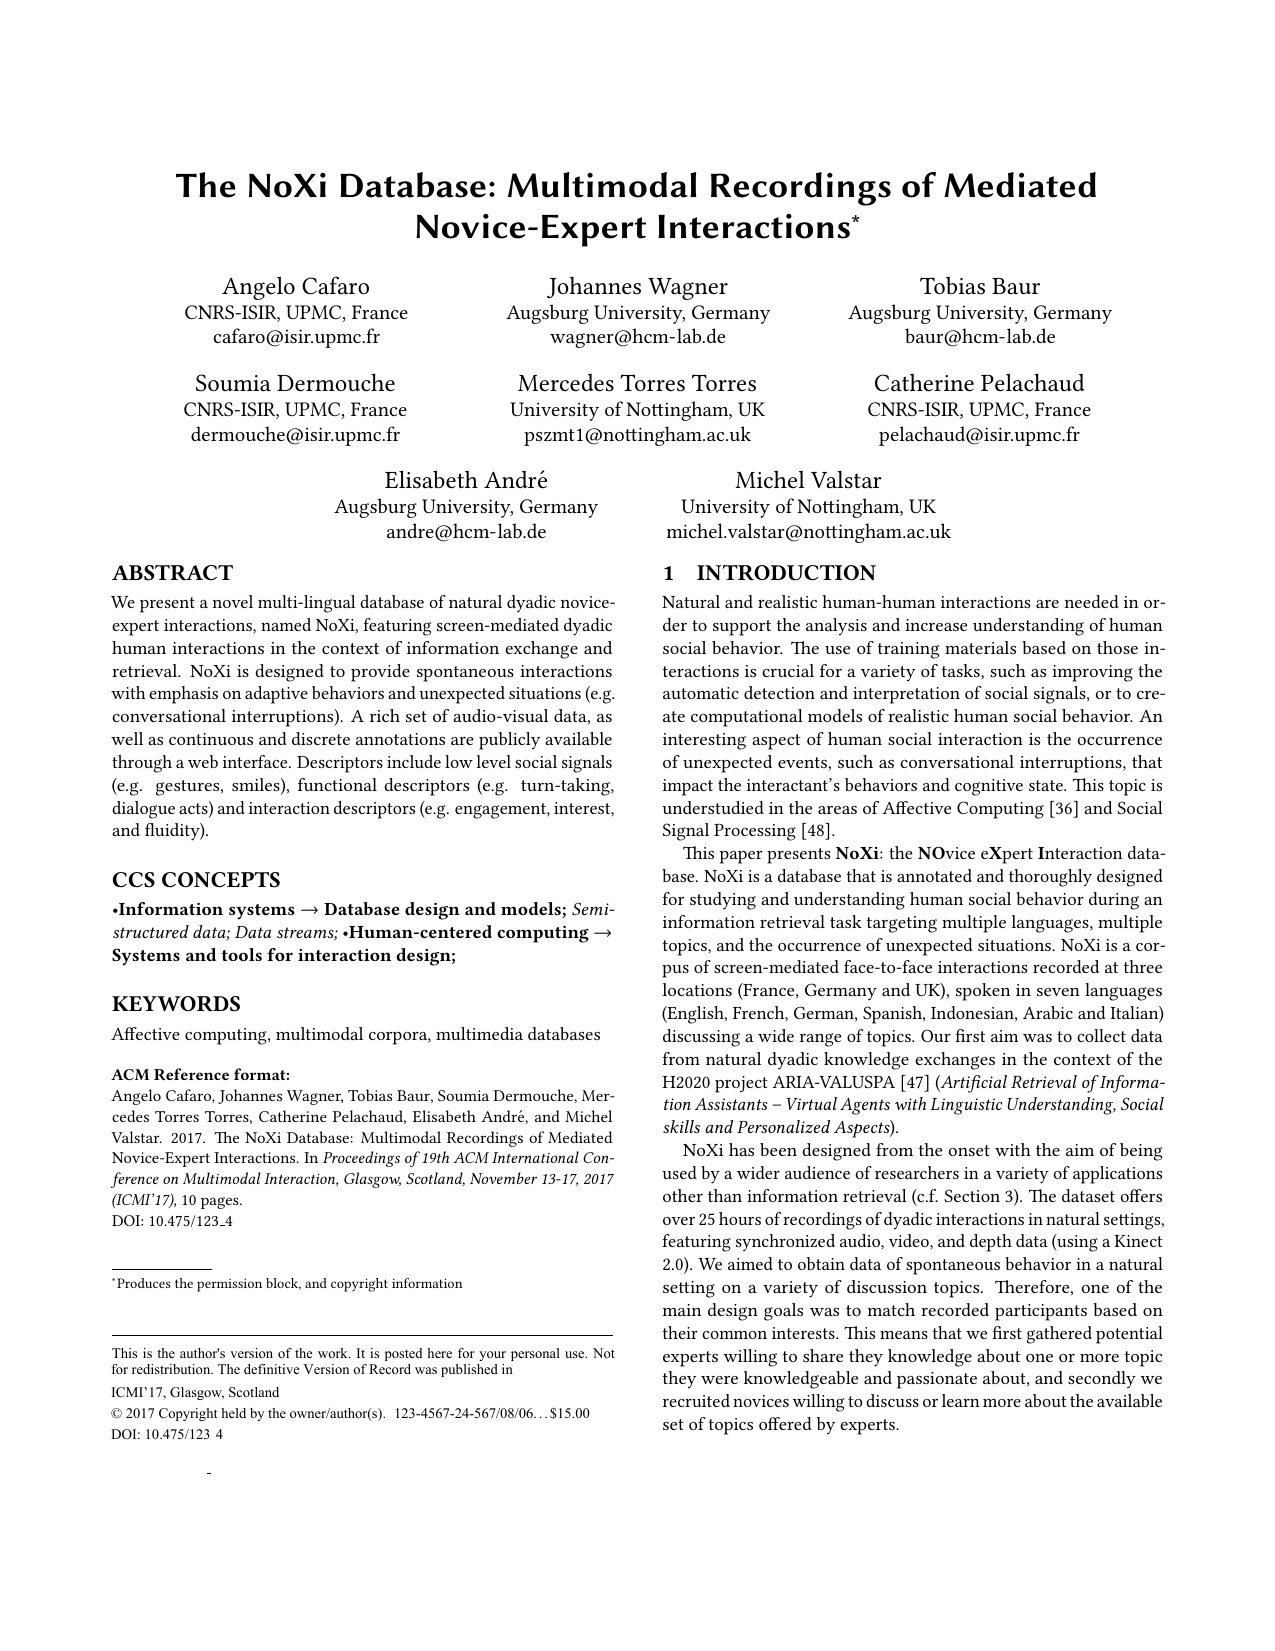 The NoXi Database: Multimodal Recordings of Mediated Novice-Expert Interactions